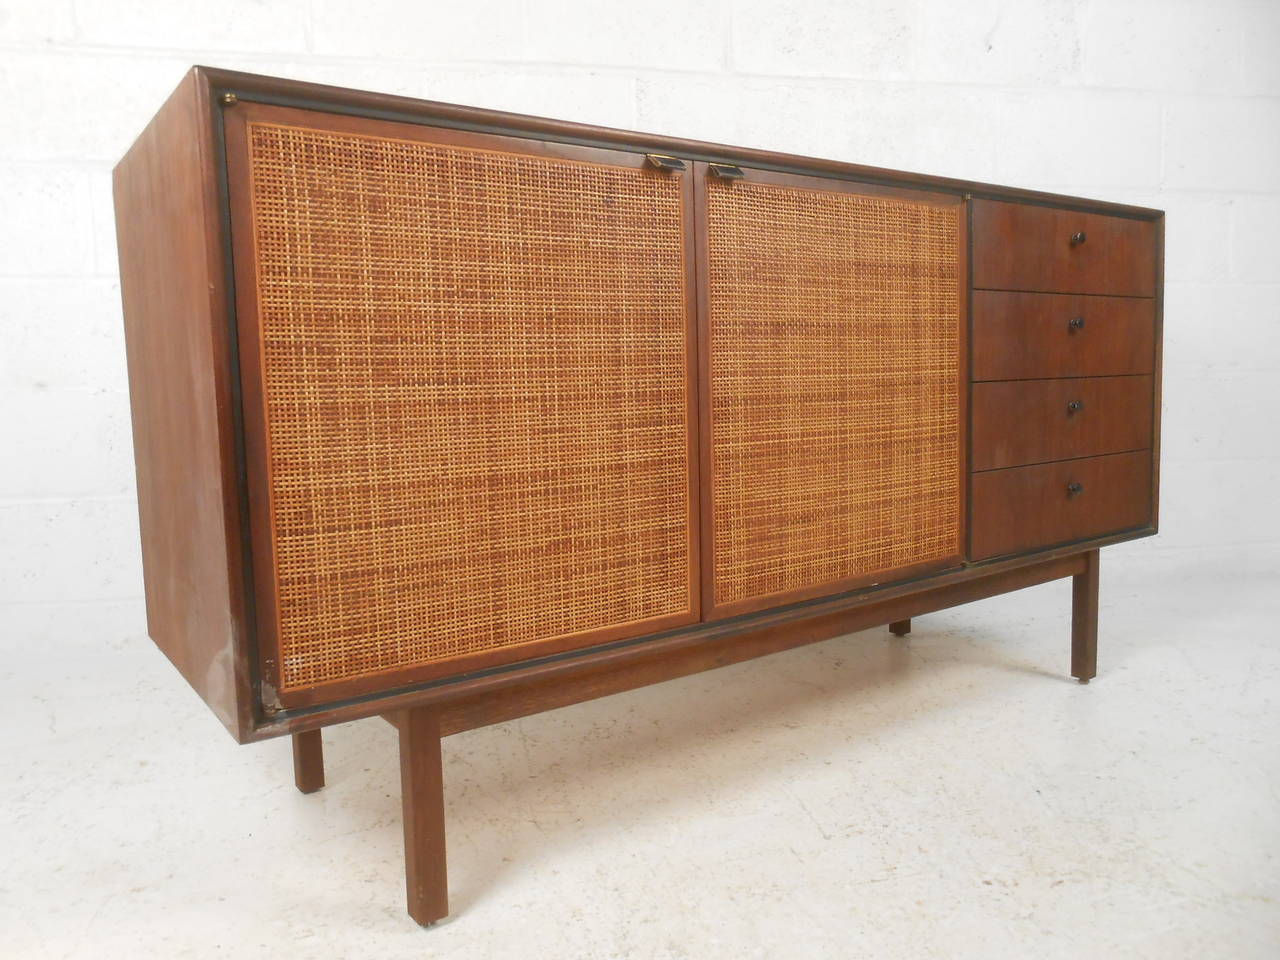 This unique cane front credenza makes a unique server in a tight dining space. Spacious cabinet storage, leather door pulls, and lovely vintage cane set this piece apart from others.  Please confirm item location (NY or NJ).